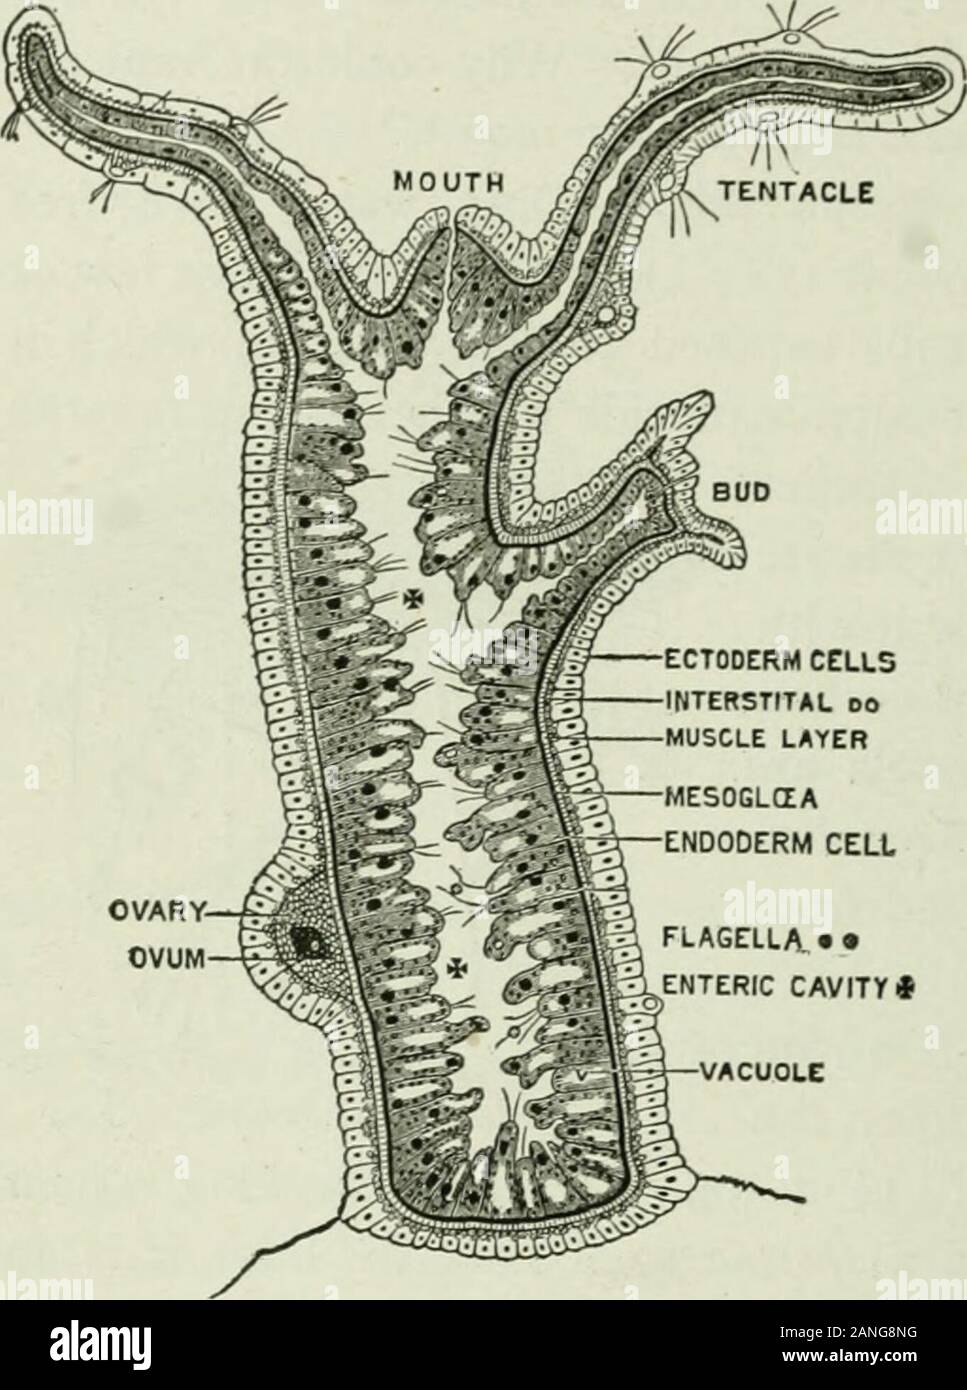 Beginners' zoology . Fig. 38. — Hydras on the under sur-face of pondweed. 26 BEGINNERS ZOOLOGY scarce. Asexual generation (by budding) is common withthe hydra when food supply is abundant. After the bud grows to a cer-tain size, theouter layer ofcells at the baseof the bud con-stricts and theyoung hydra isdetached. Compare thesponge and thehydra in the fol-lowing respects:— many celled,or one celled;obtaining food ;breathing; tubesand cavities;openings; re-production ; loco-motion. Whichranks higher. ECTODERM CELLSINTERSTITAL 00MUSCLE LAYER FLAGELLA • •ENTERIC CAVITY* Fig. 39. ? • Longitudinal Stock Photo